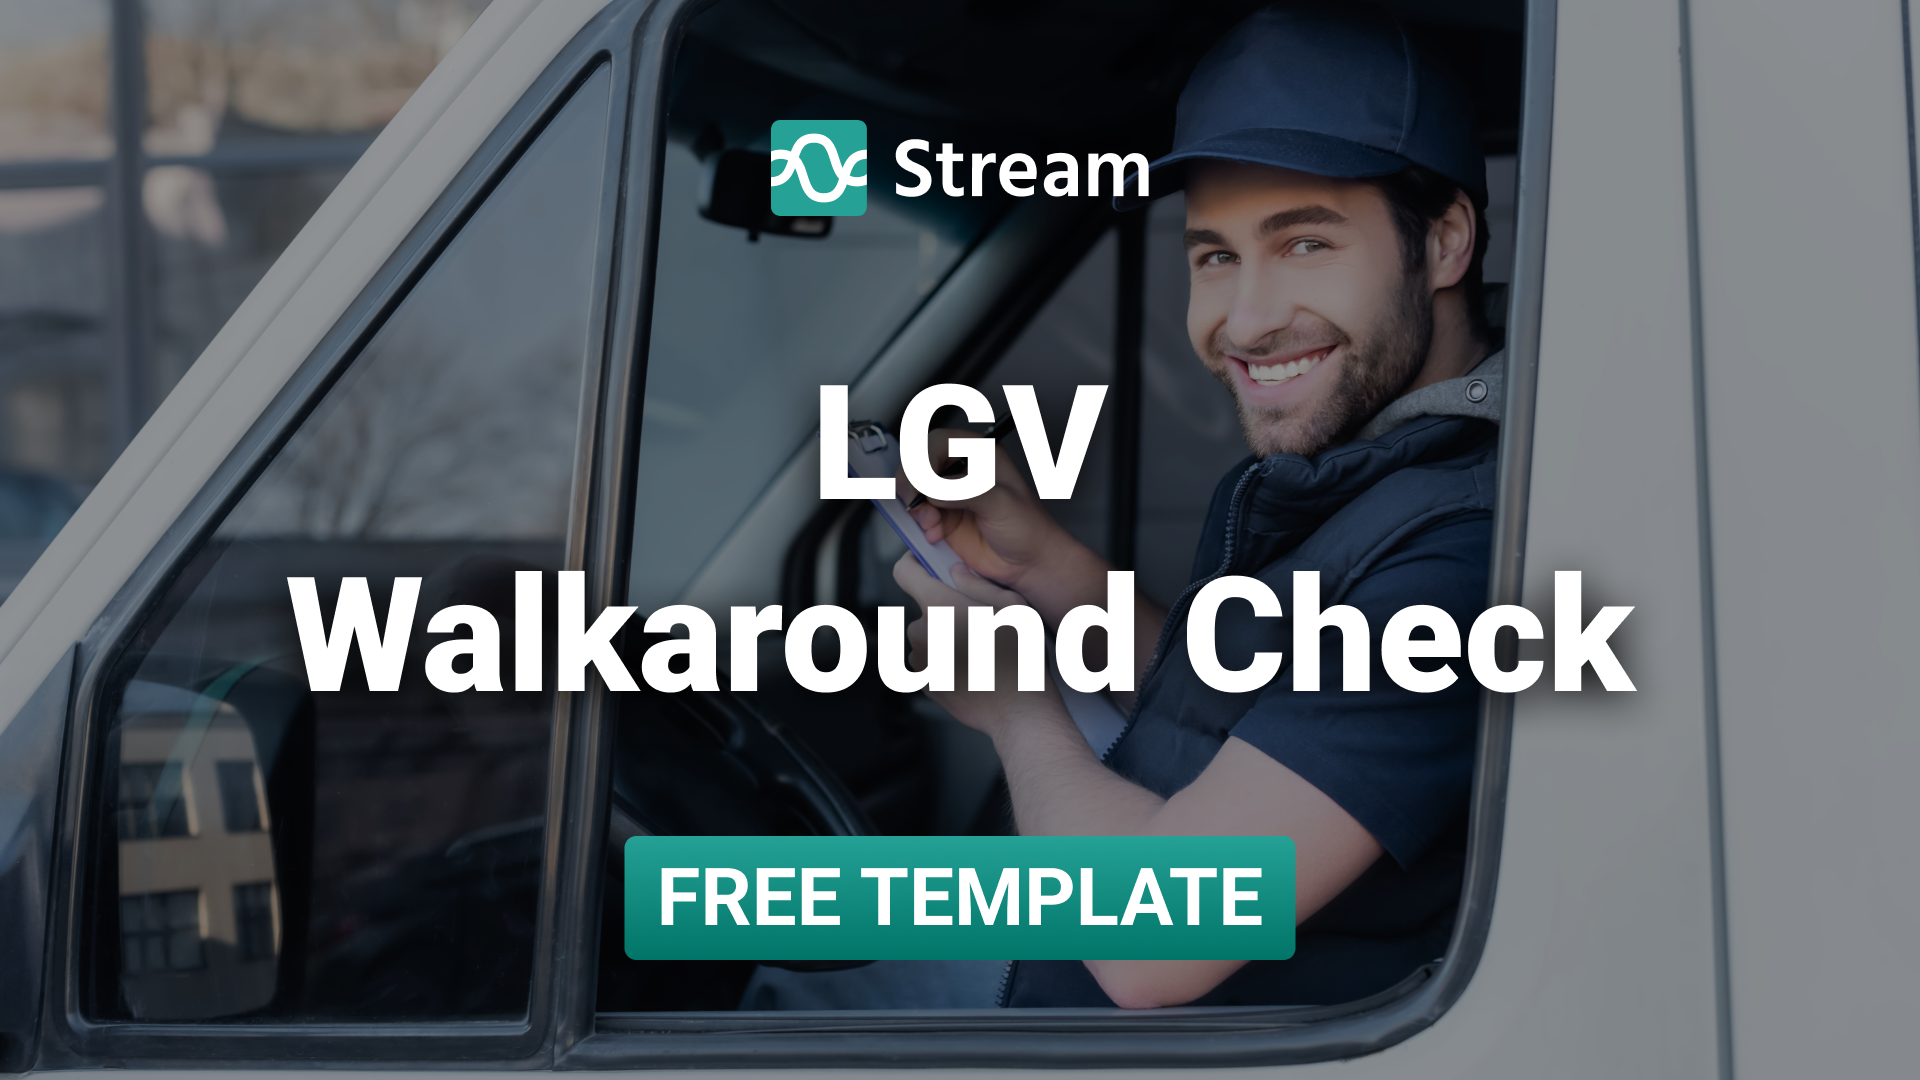 LGV-Walkaround-Check-Template-FREE-Download-Featured-Image